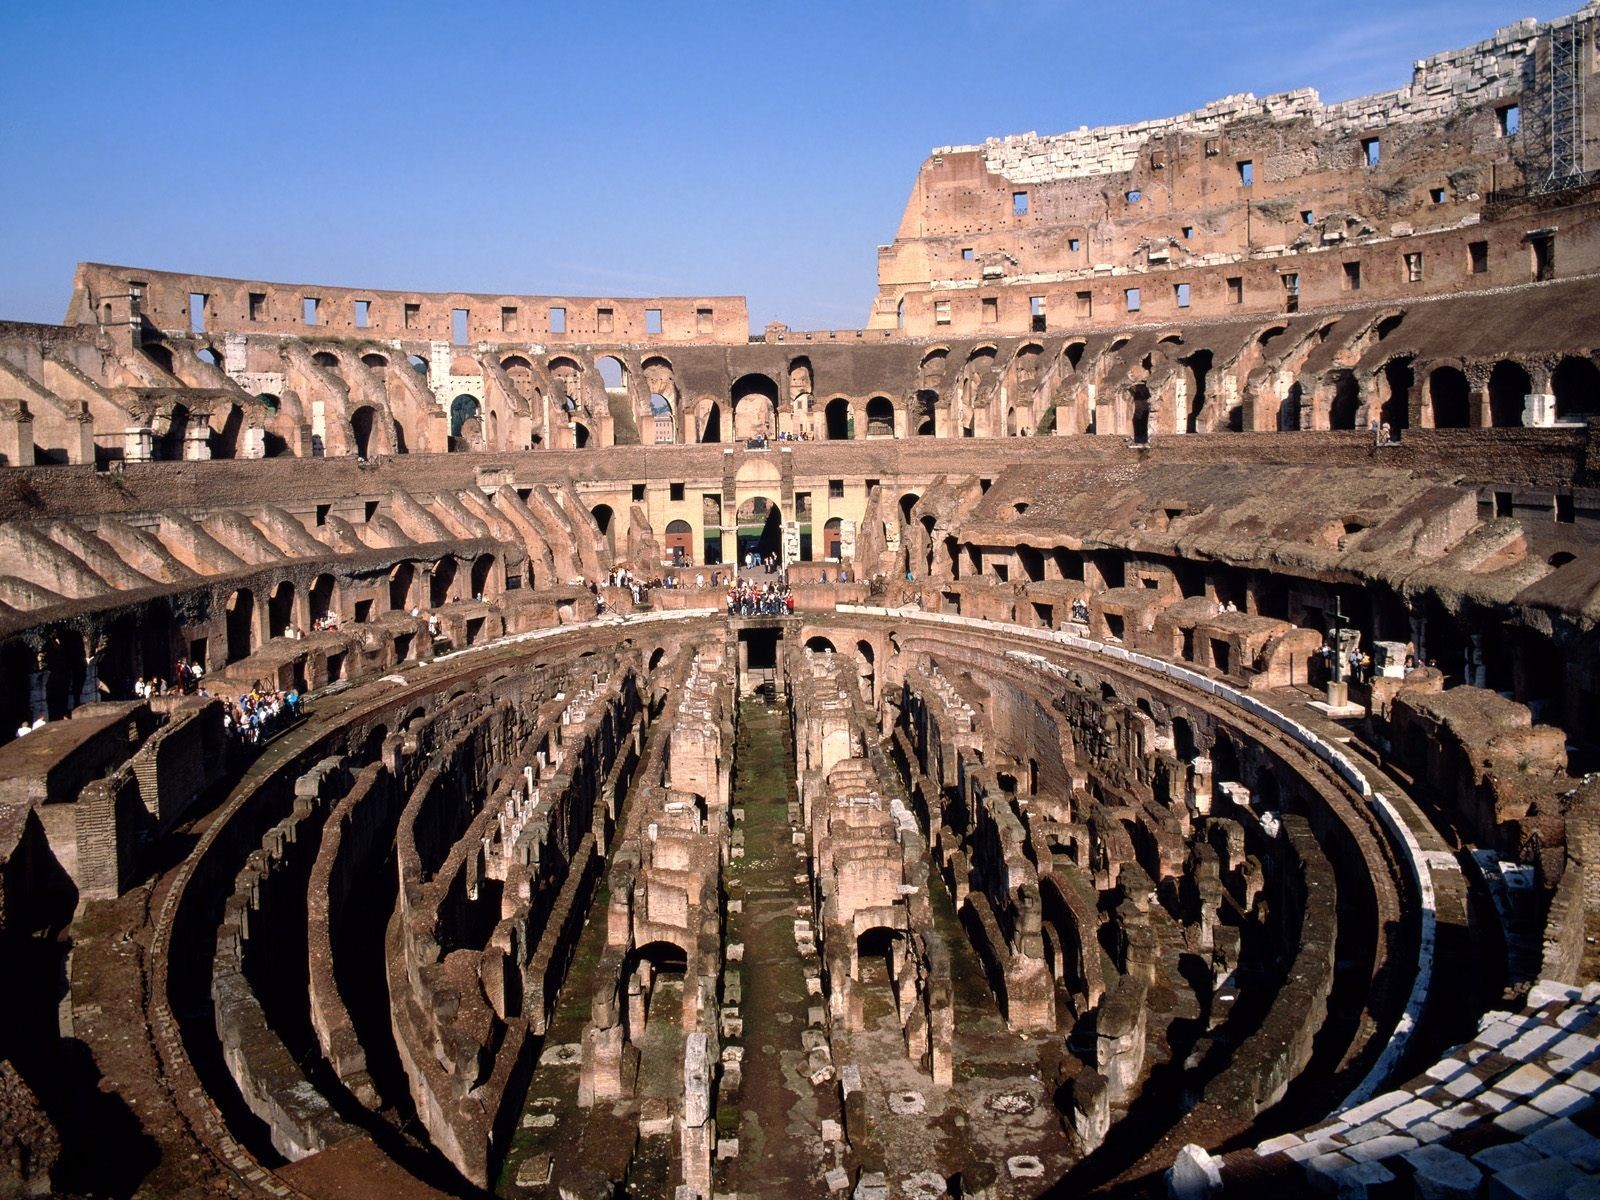 General 1600x1200 Colosseum Rome Italy ruins ancient history Ancient Rome landmark Europe World Heritage Site